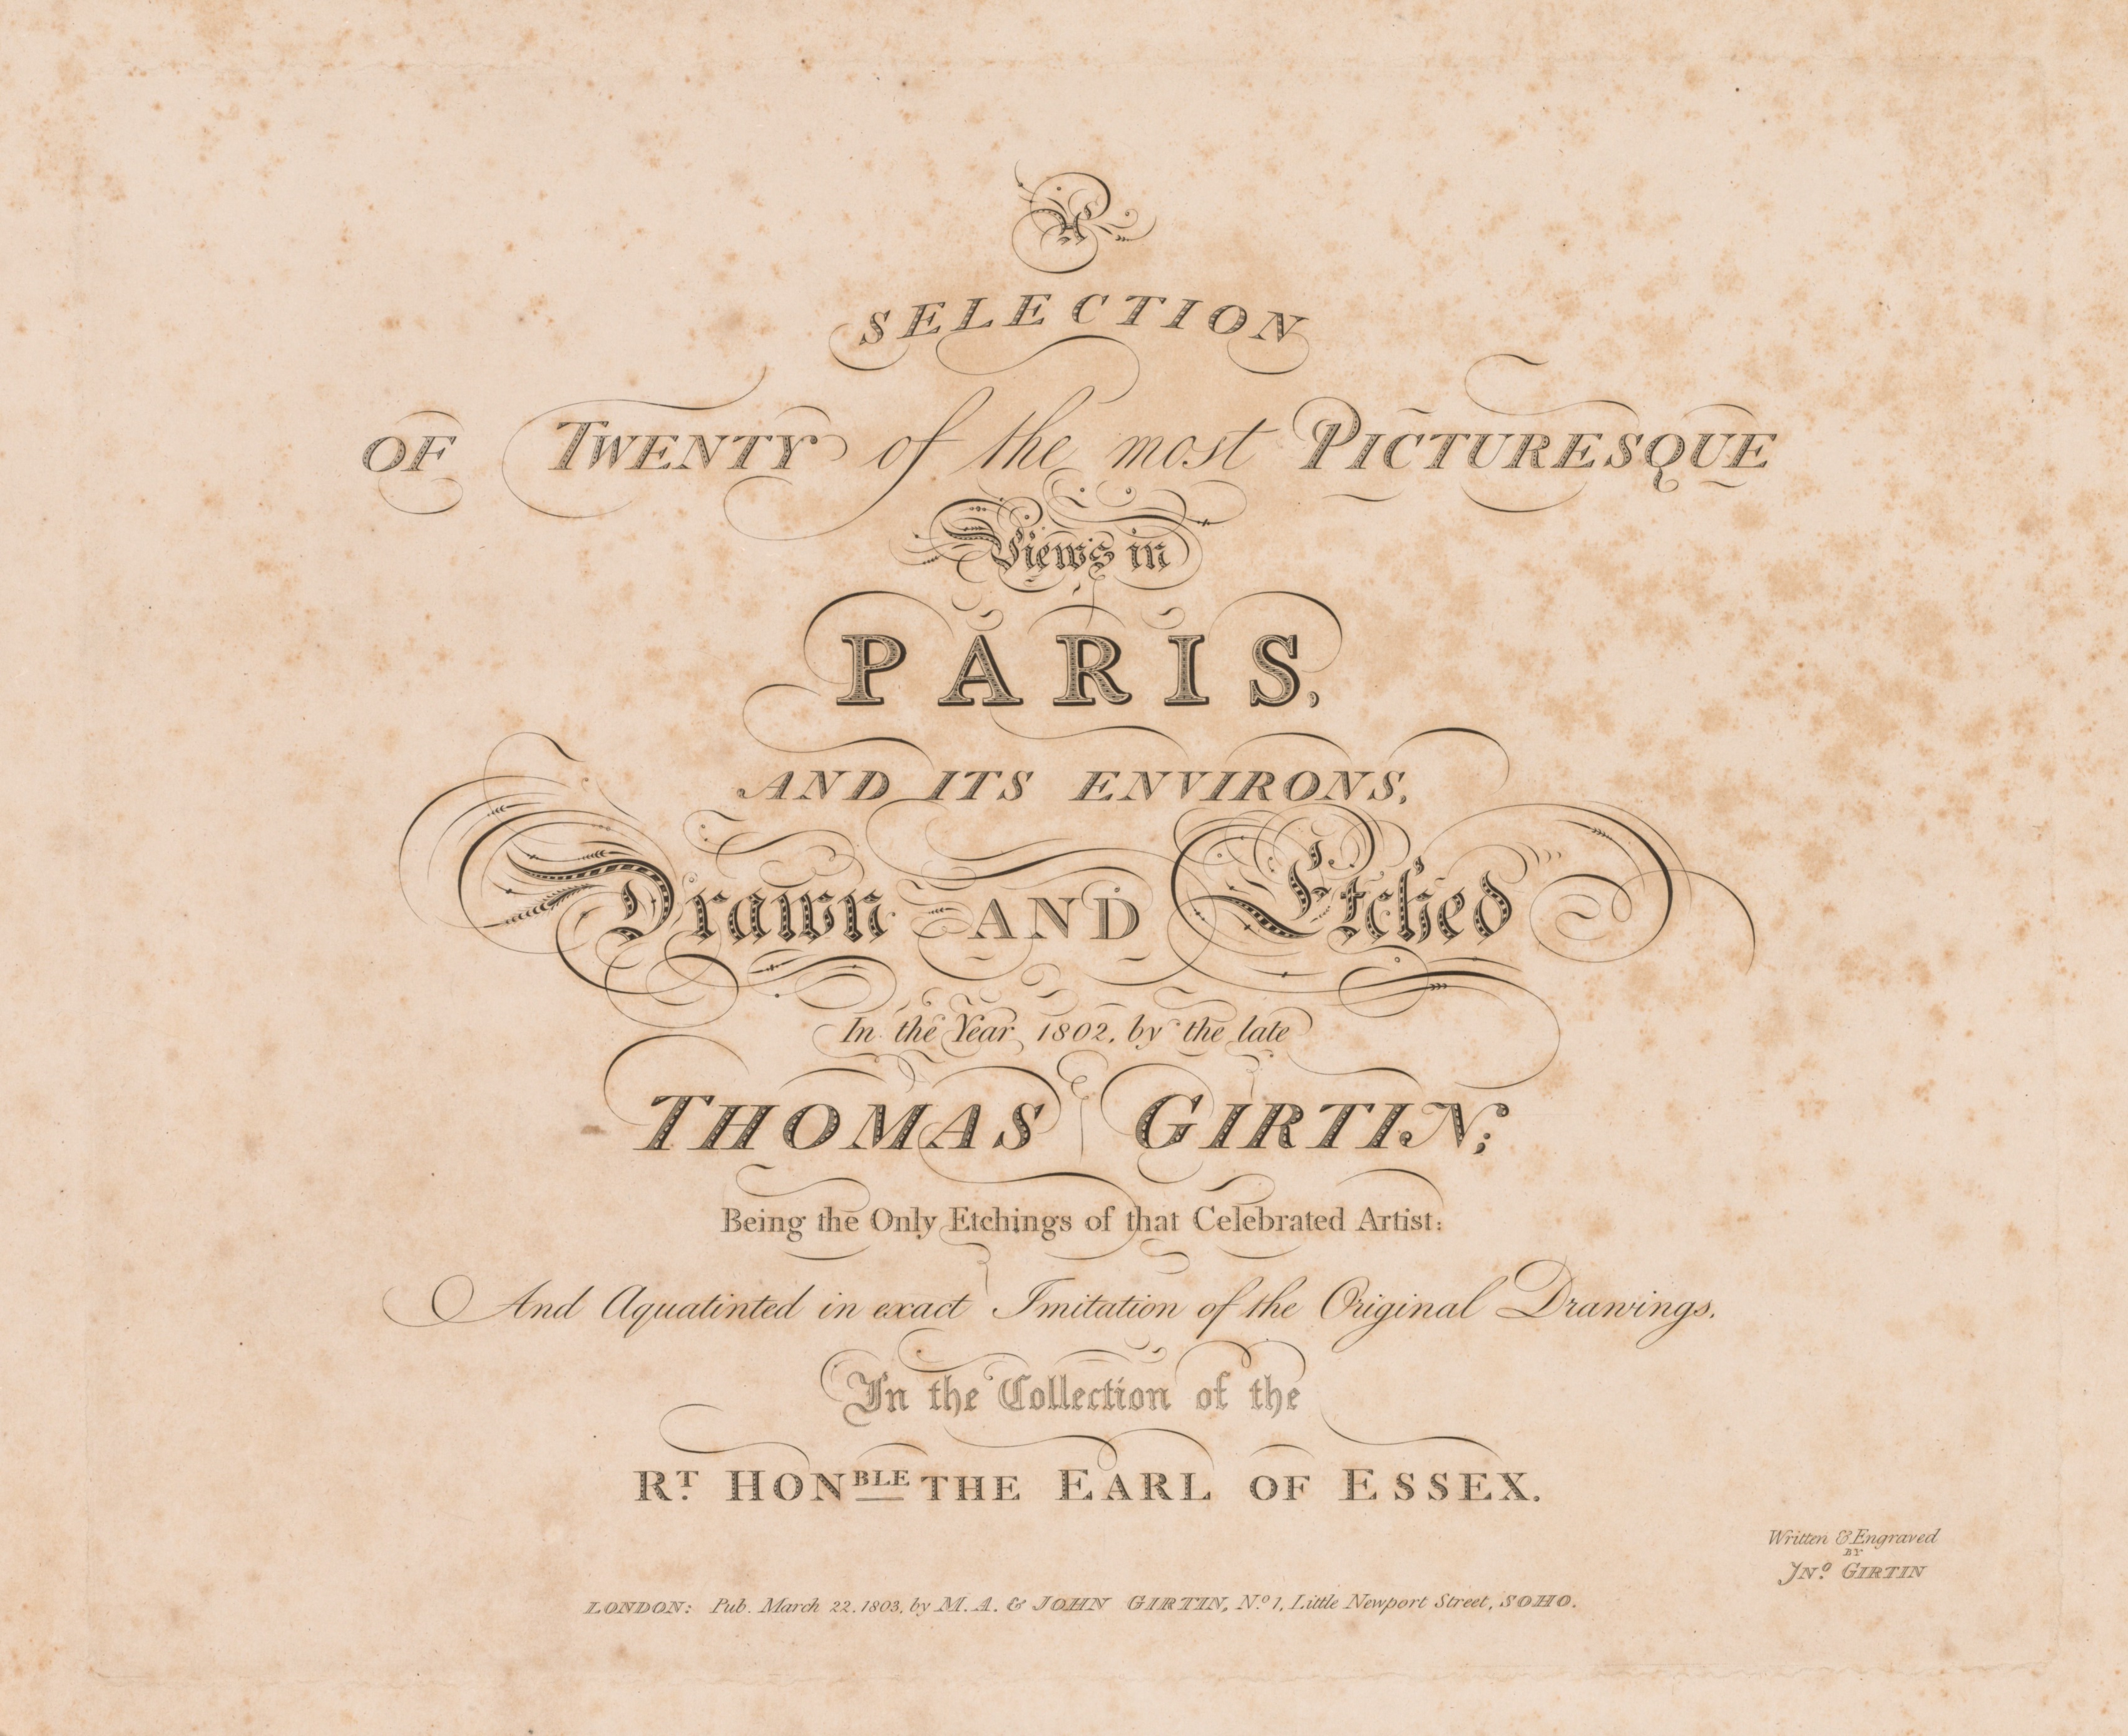 A Selection of Twenty of the Most Picturesque Views in Paris, And its Environs: Title Page